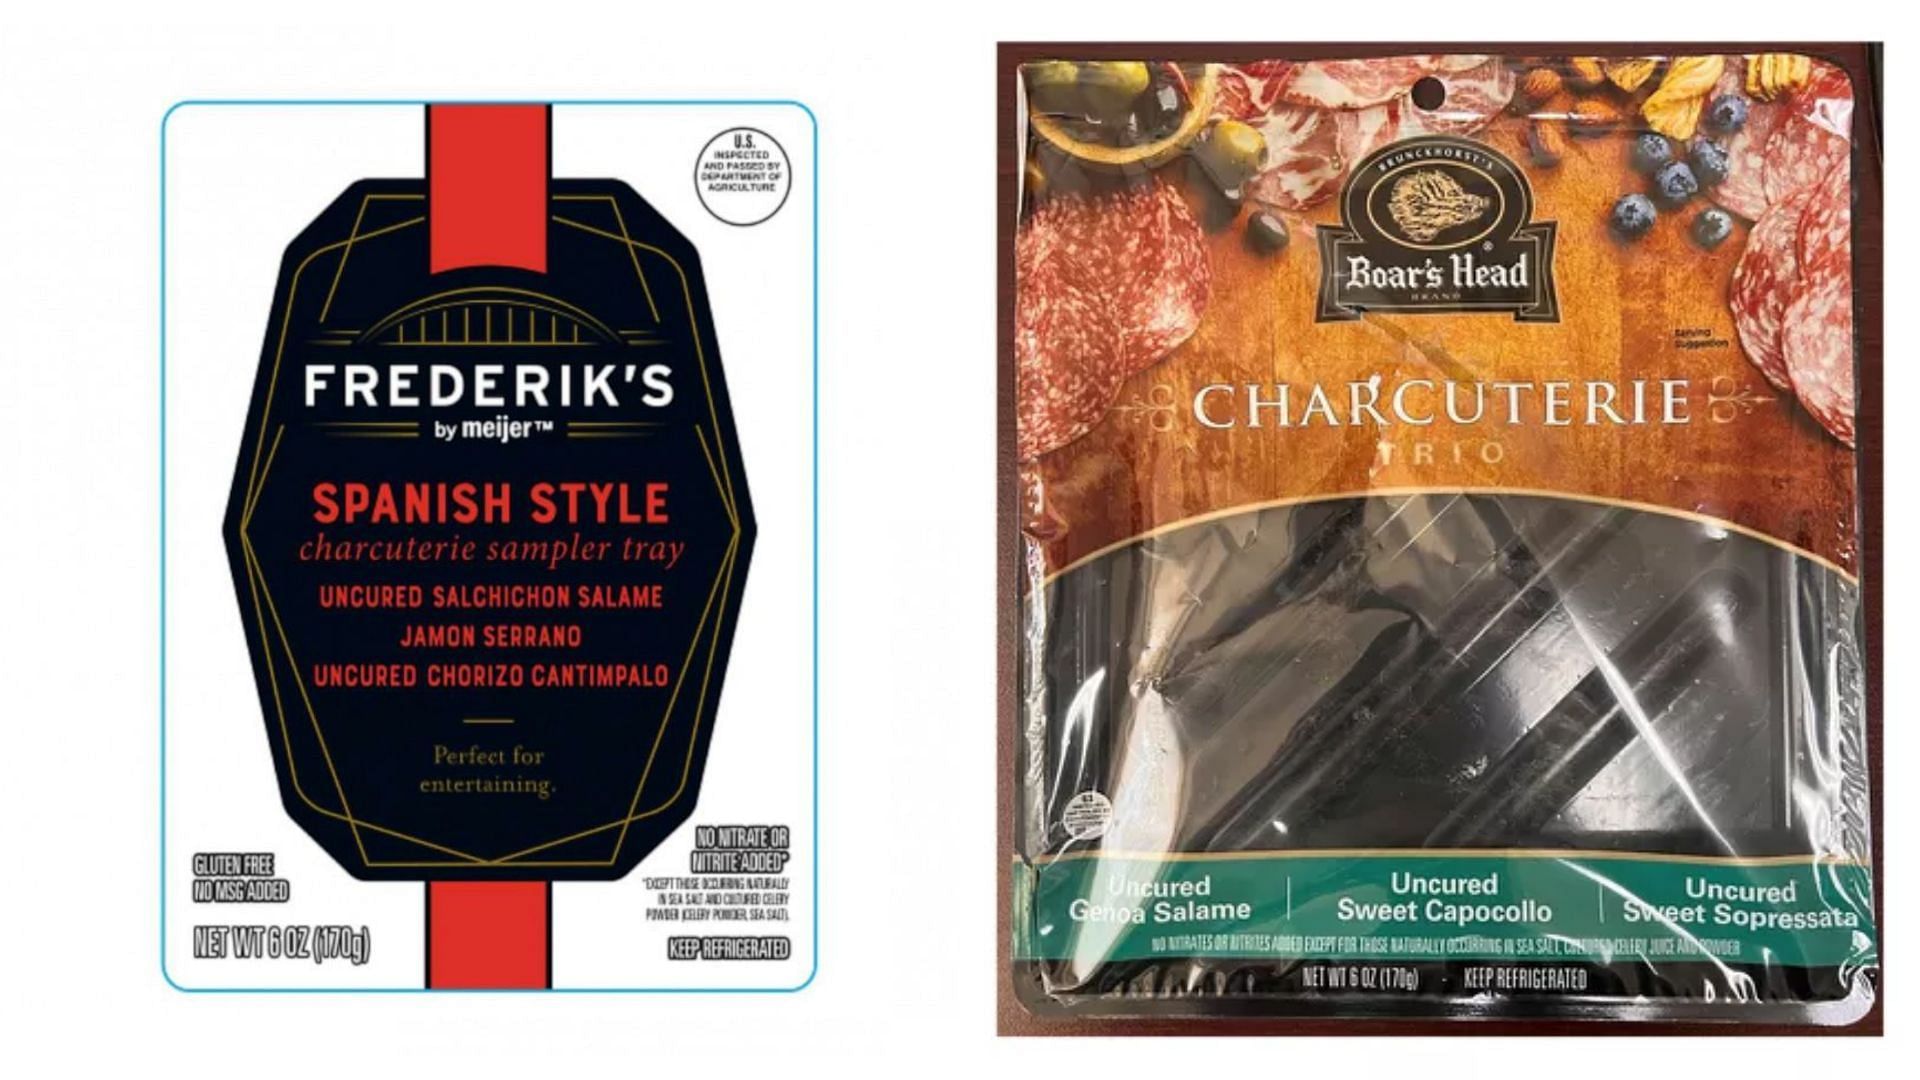 the affected products: Boar&#039;s Head Charcuterie Trio Charcuterie sausage and salami, and Fredricks by Meijer Spanish Style Charcuterie Sampler Tray (Image via FSIS)